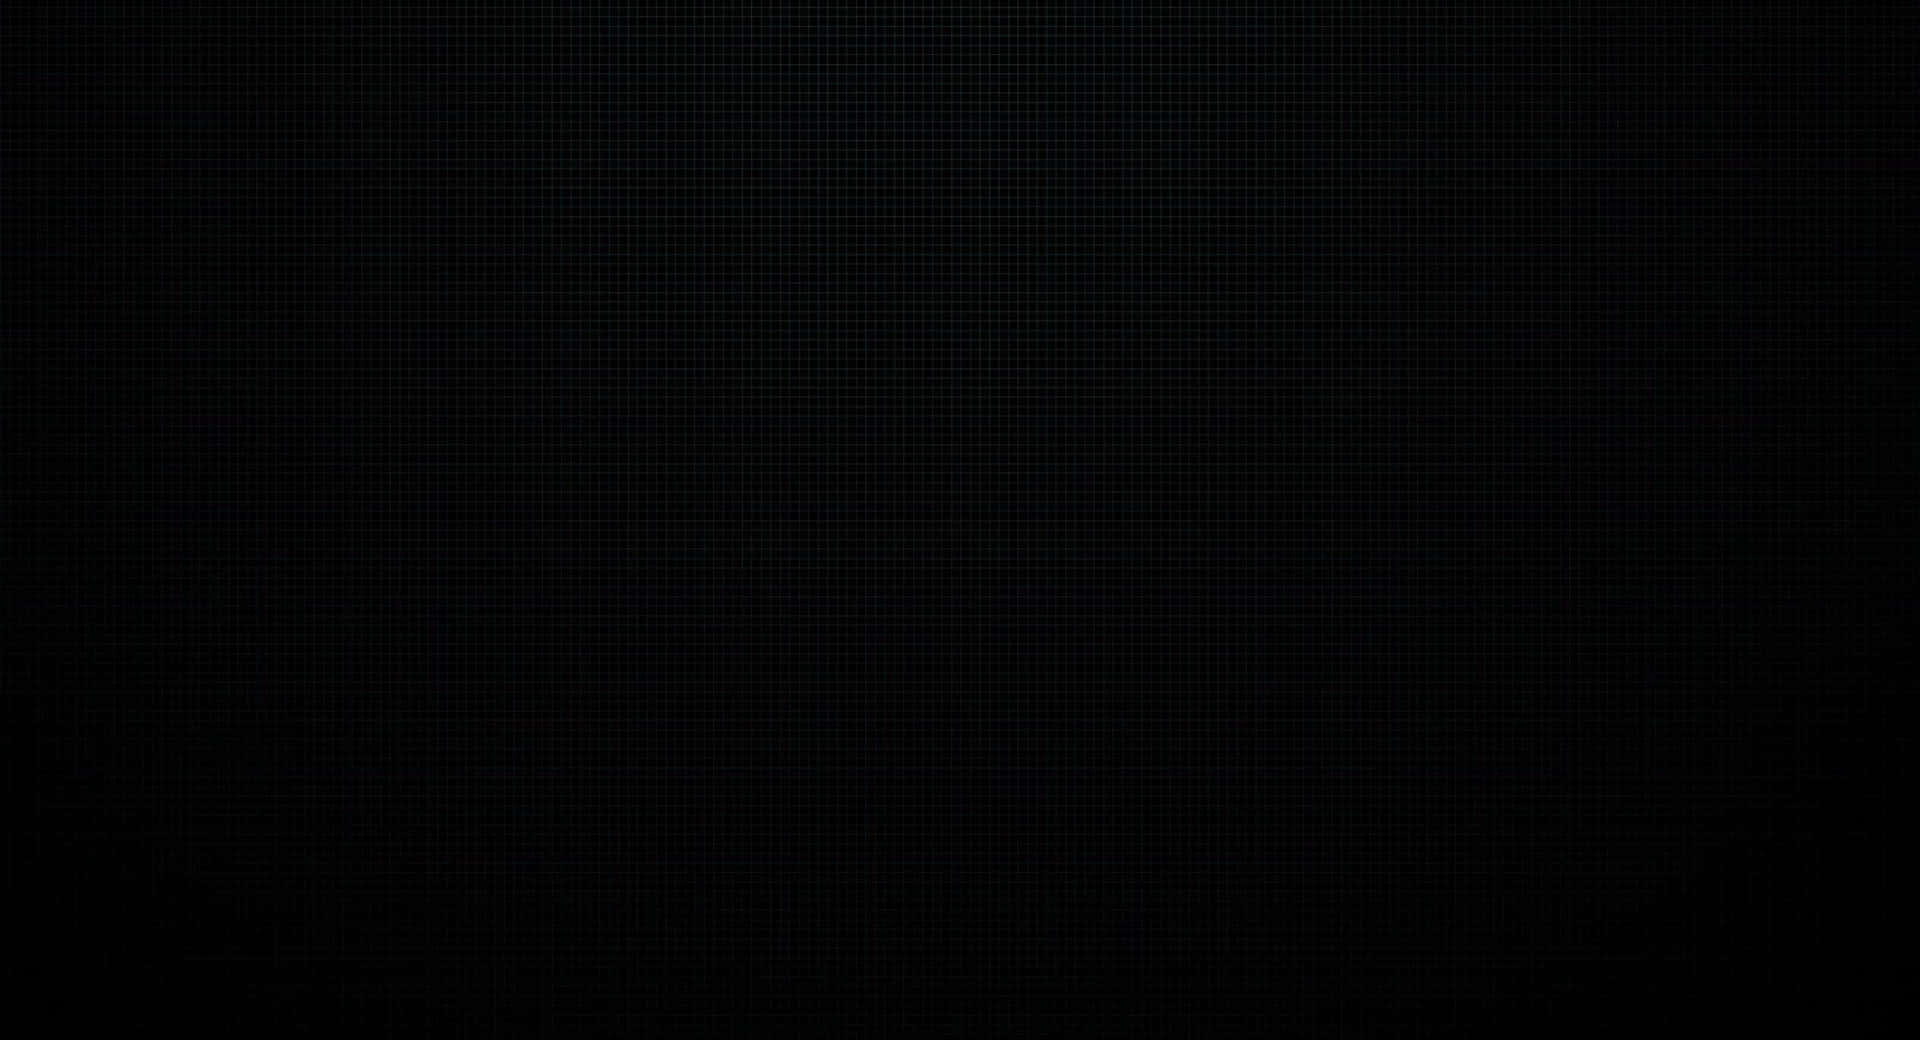 [100+] Pure Black Backgrounds | Wallpapers.com